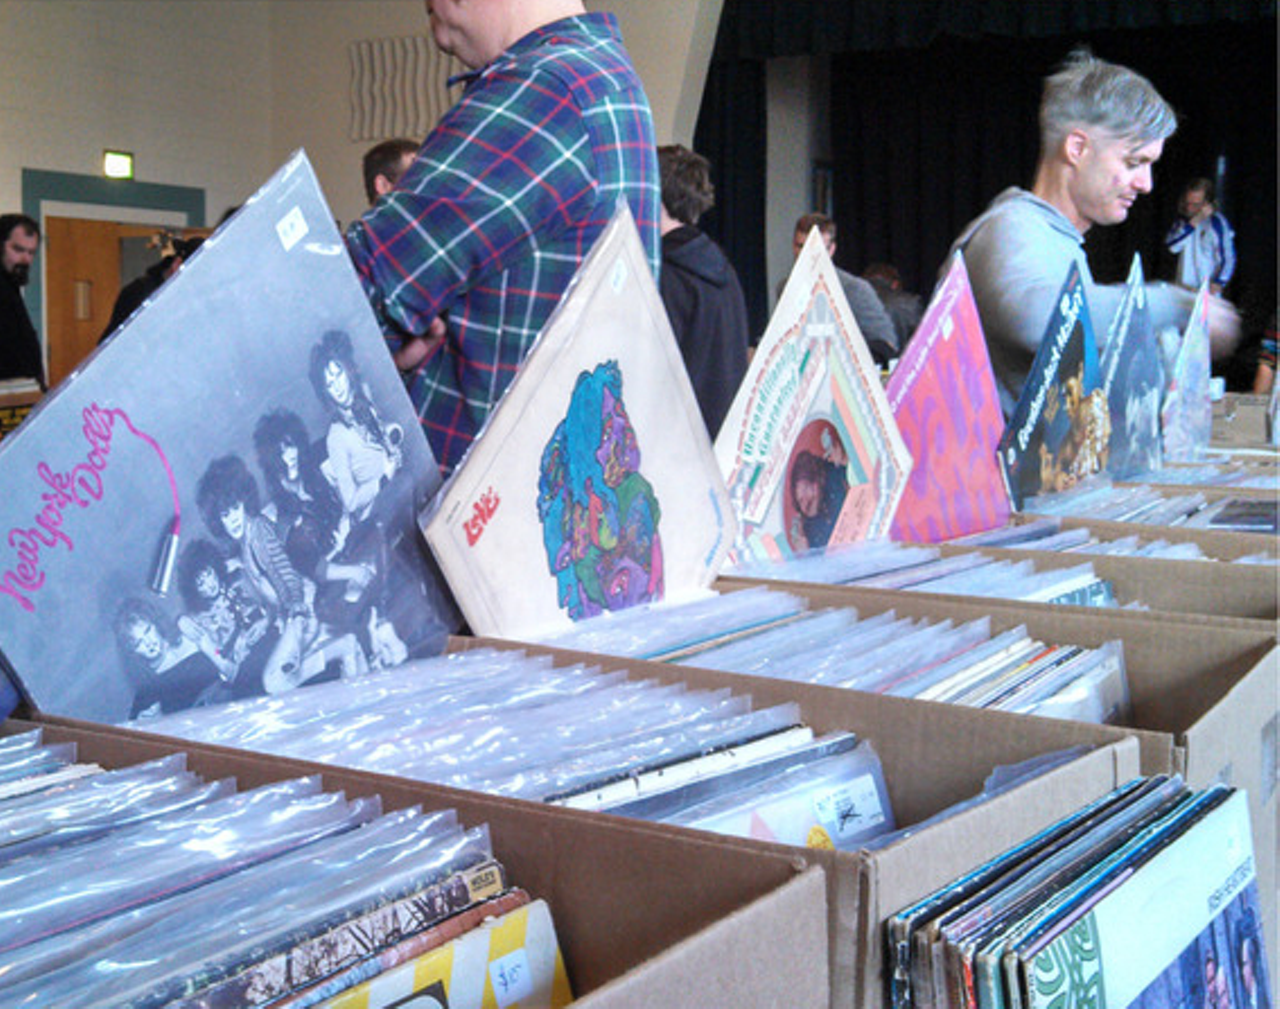 Northside Record Fair
11 a.m.-4 p.m. April 1
The biannual Northside Record Fair is a Cincinnati staple that attracts collectors and vinyl lovers from across the Midwest. More than 20 vendors will make their rare collections available to swoon over or buy. The event is sponsored by Shake It Records and Torn Light Records, and according to the event page it “ain’t no Beatles and Elvis fair.” Posters, t-shirts and other music memorabilia will also be for sale. Tickets are $5. 11 a.m.-4 p.m. April 1. 4222 Hamilton Ave., Northside, northsiderecordfair.com.